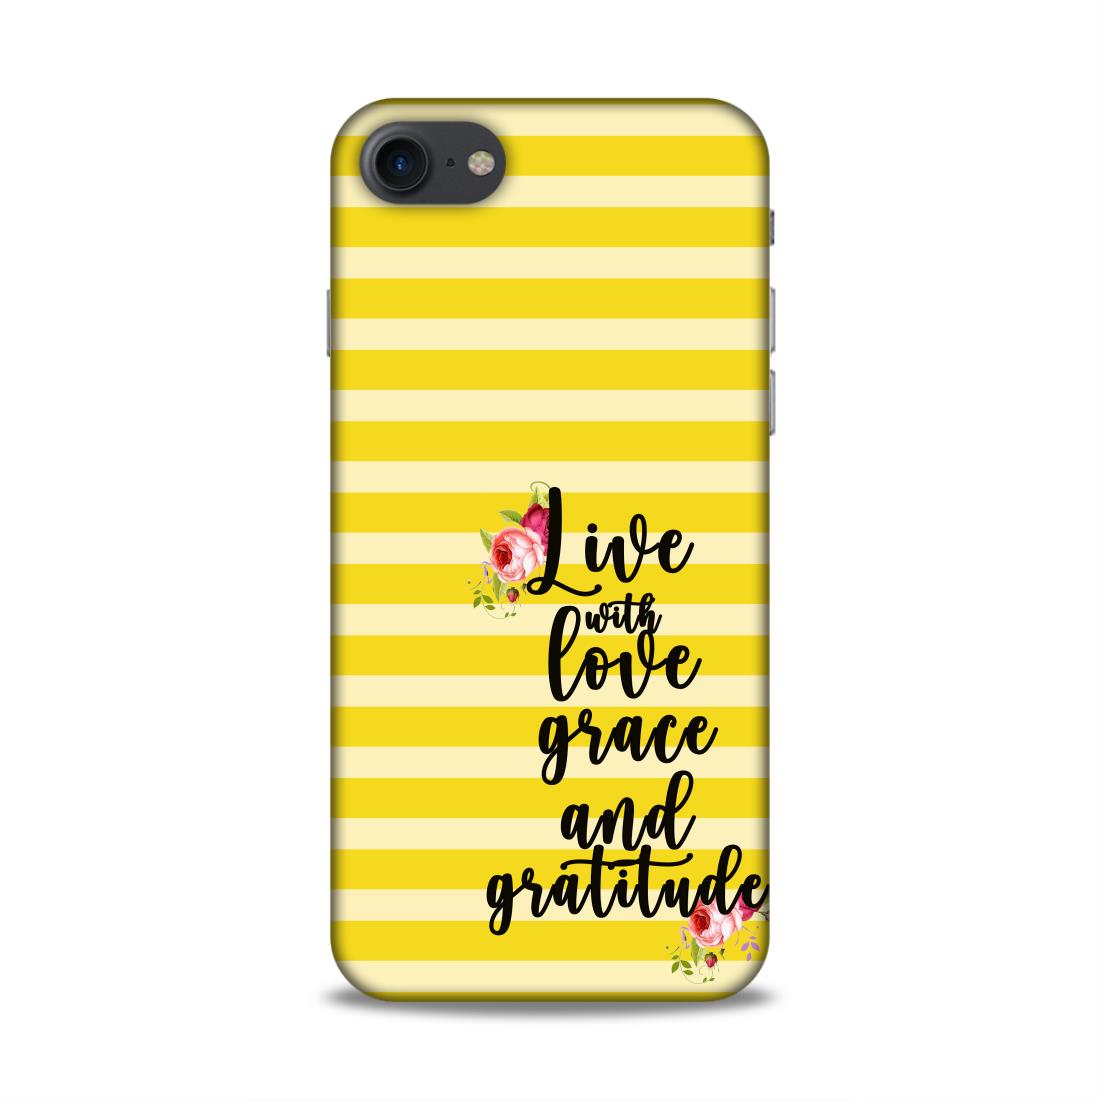 Live with Love Grace and Gratitude Hard Back Case For Apple iPhone 7 / 8 / SE 2020